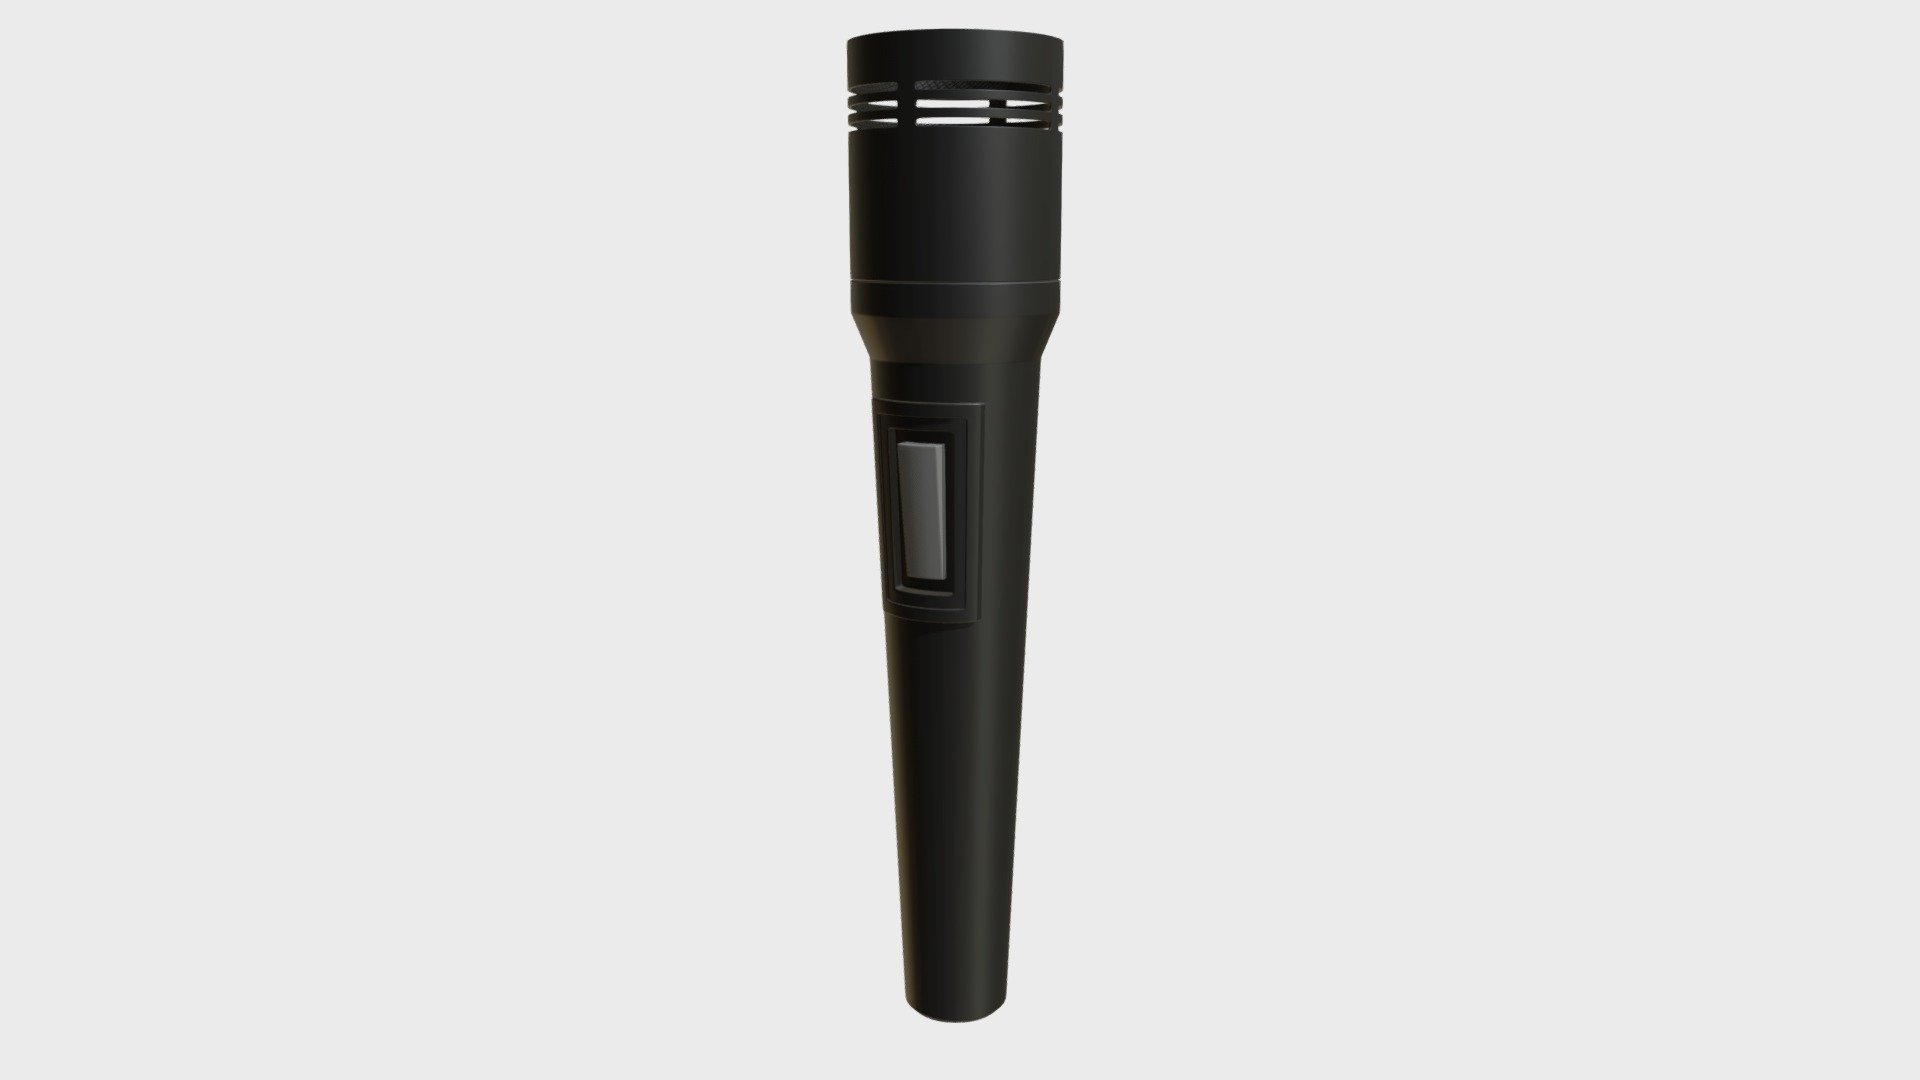 3D model Modern Microphone - This is a 3D model of the Modern Microphone. The 3D model is about a black cylindrical object.